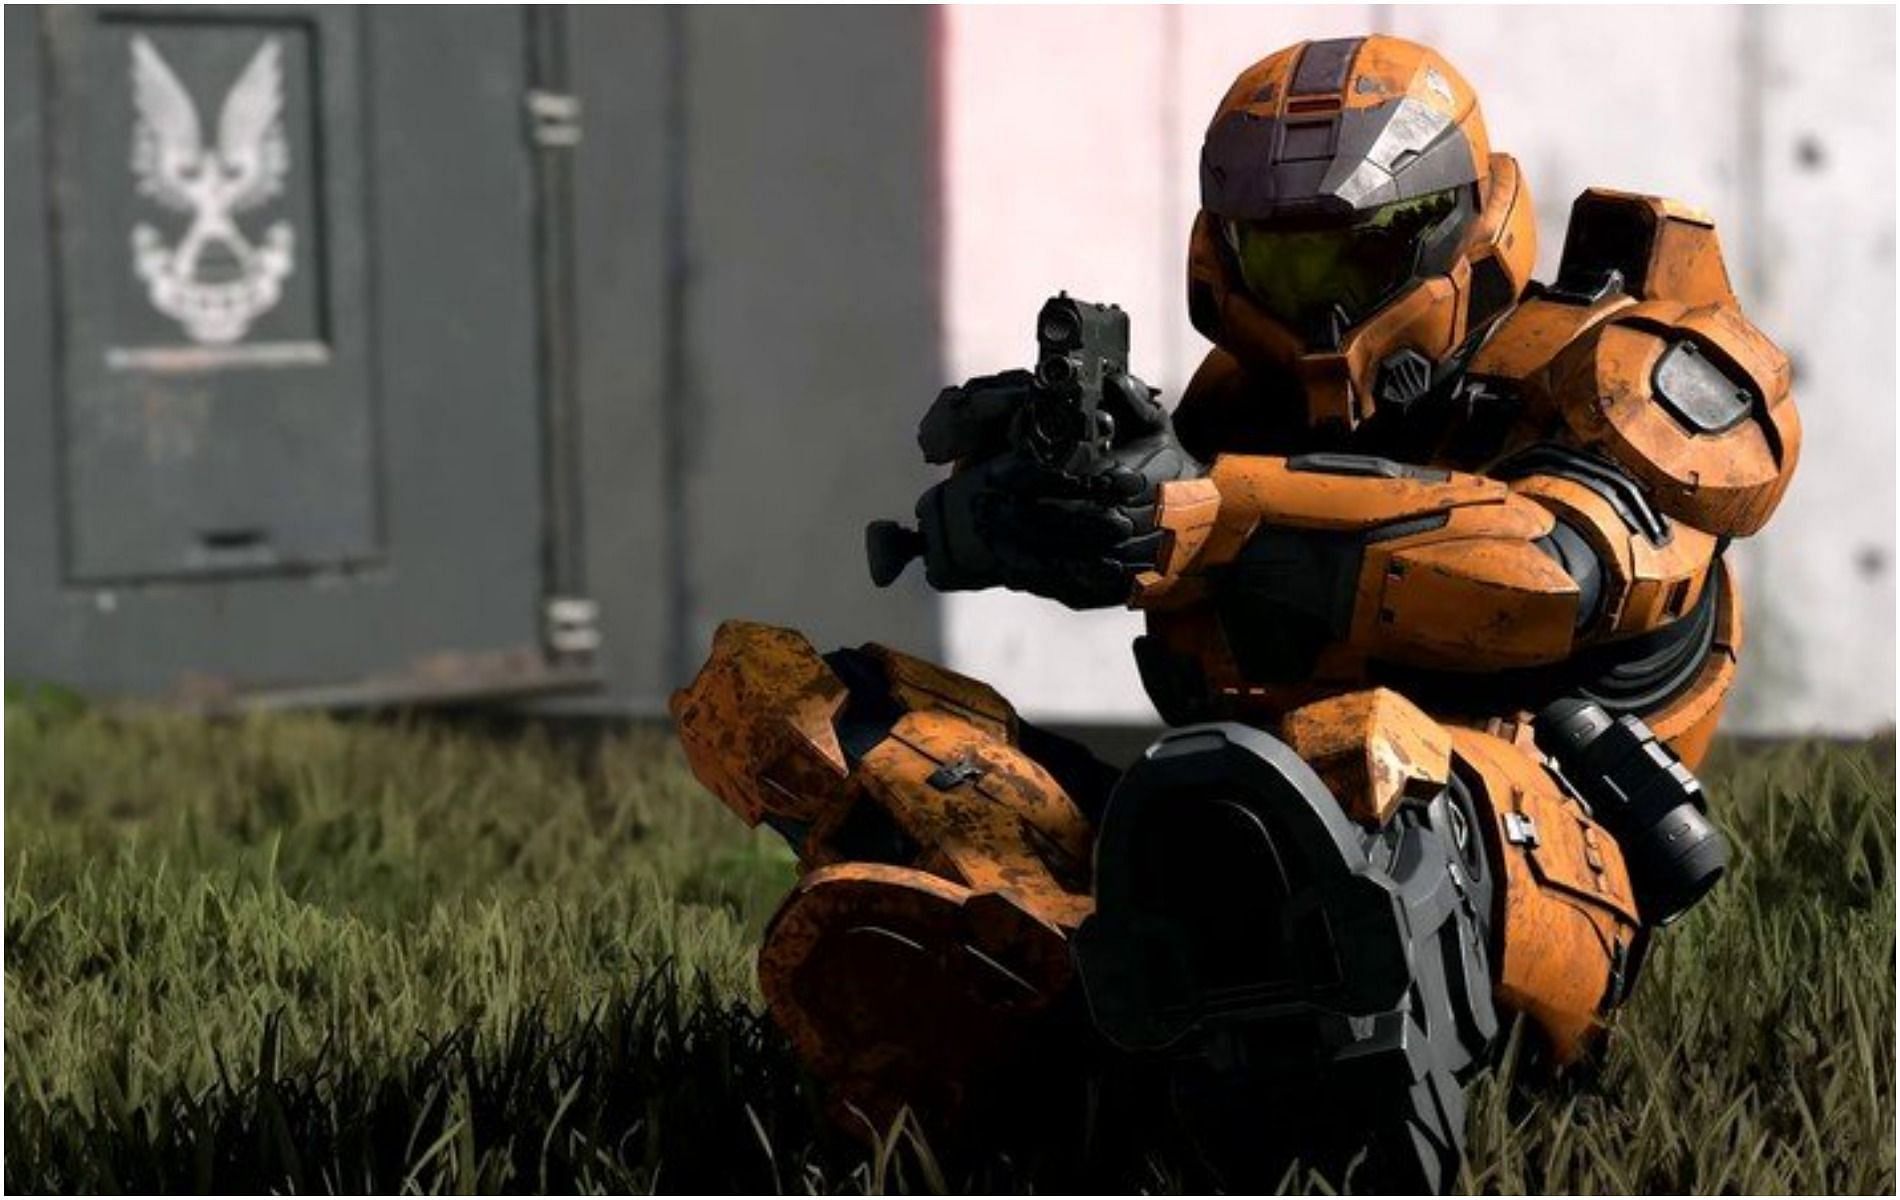 Replaying games in Halo Infinite: how to watch and save matches permanently (Image via 343 Industries)